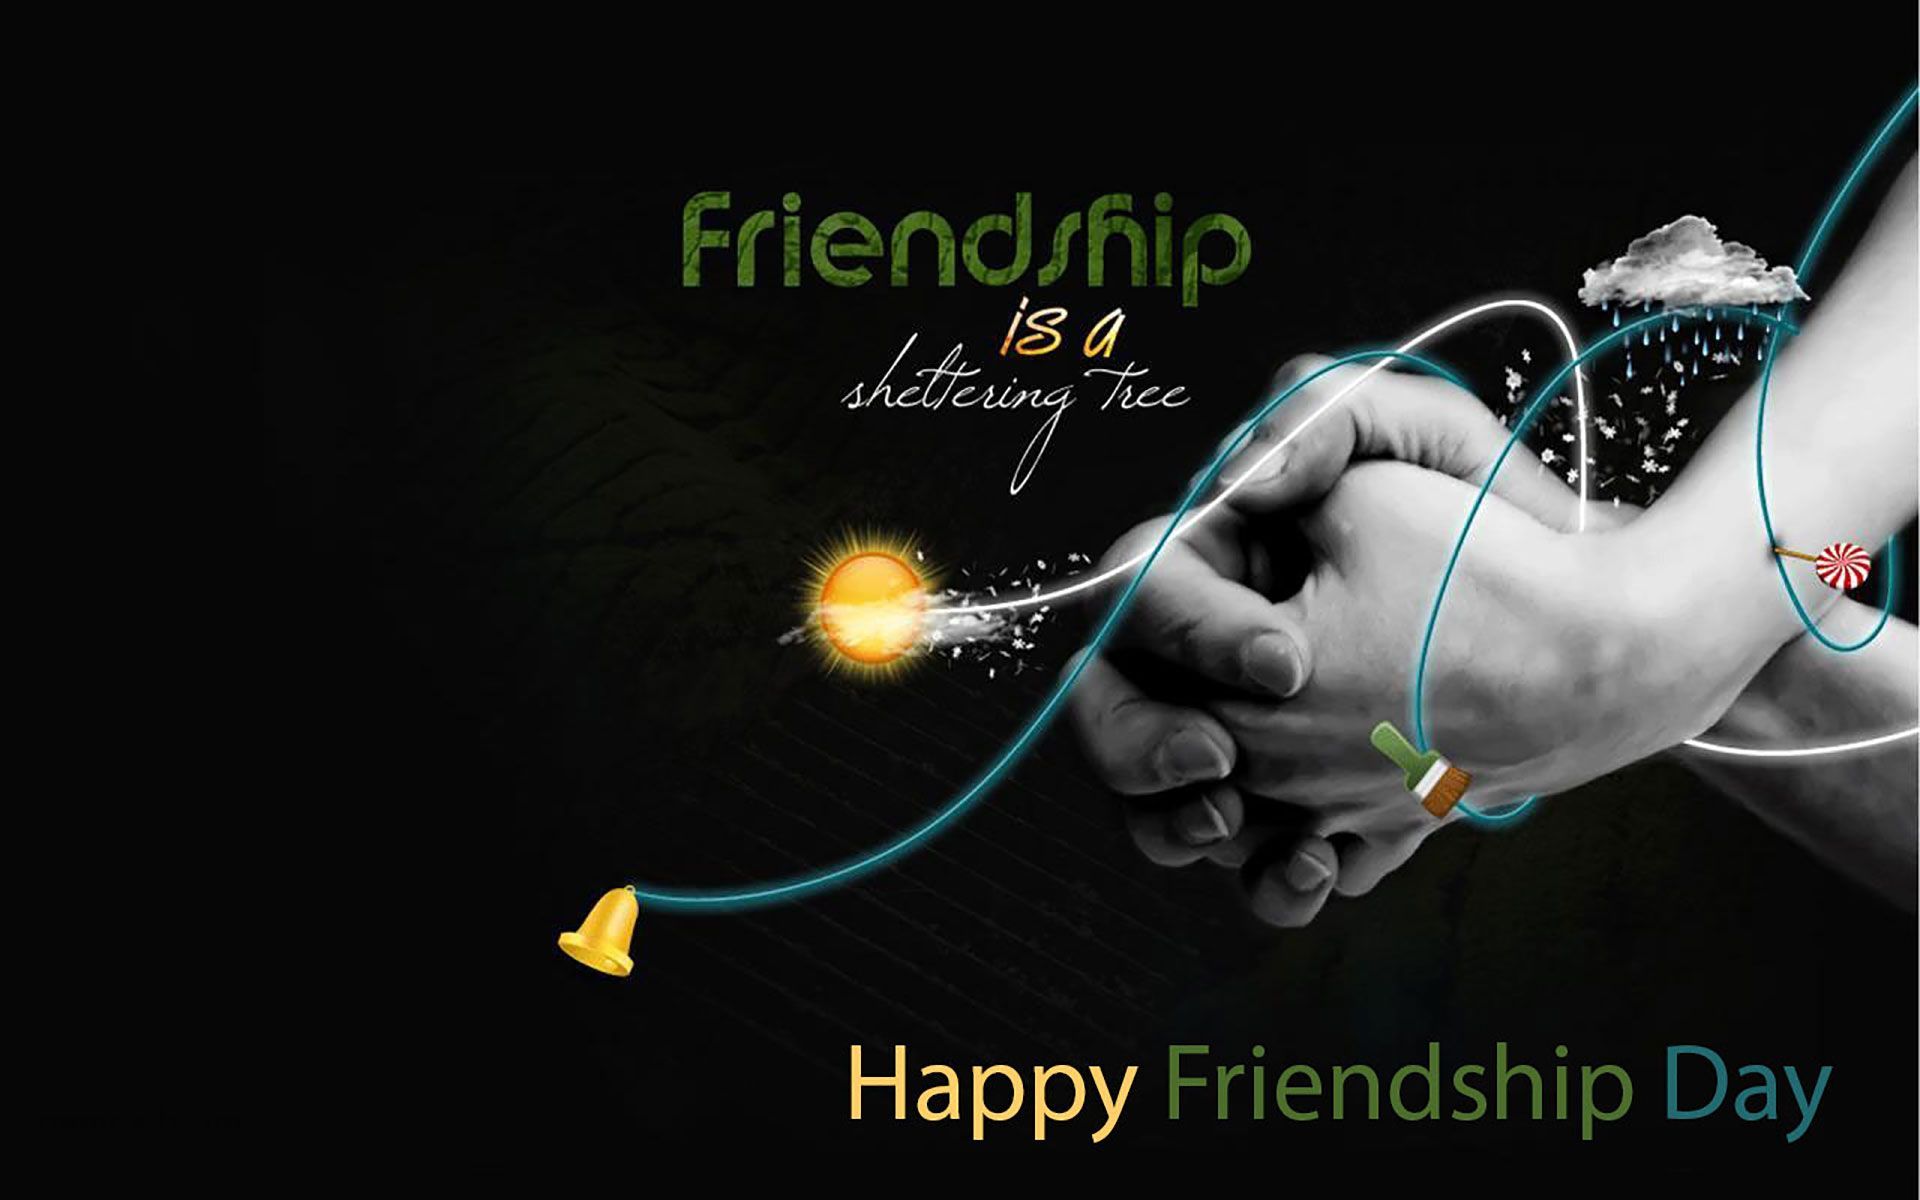 Happy Friendship Day Wallpaper with Quotes. Happy friendship, Happy friendship day picture, Friendship day image